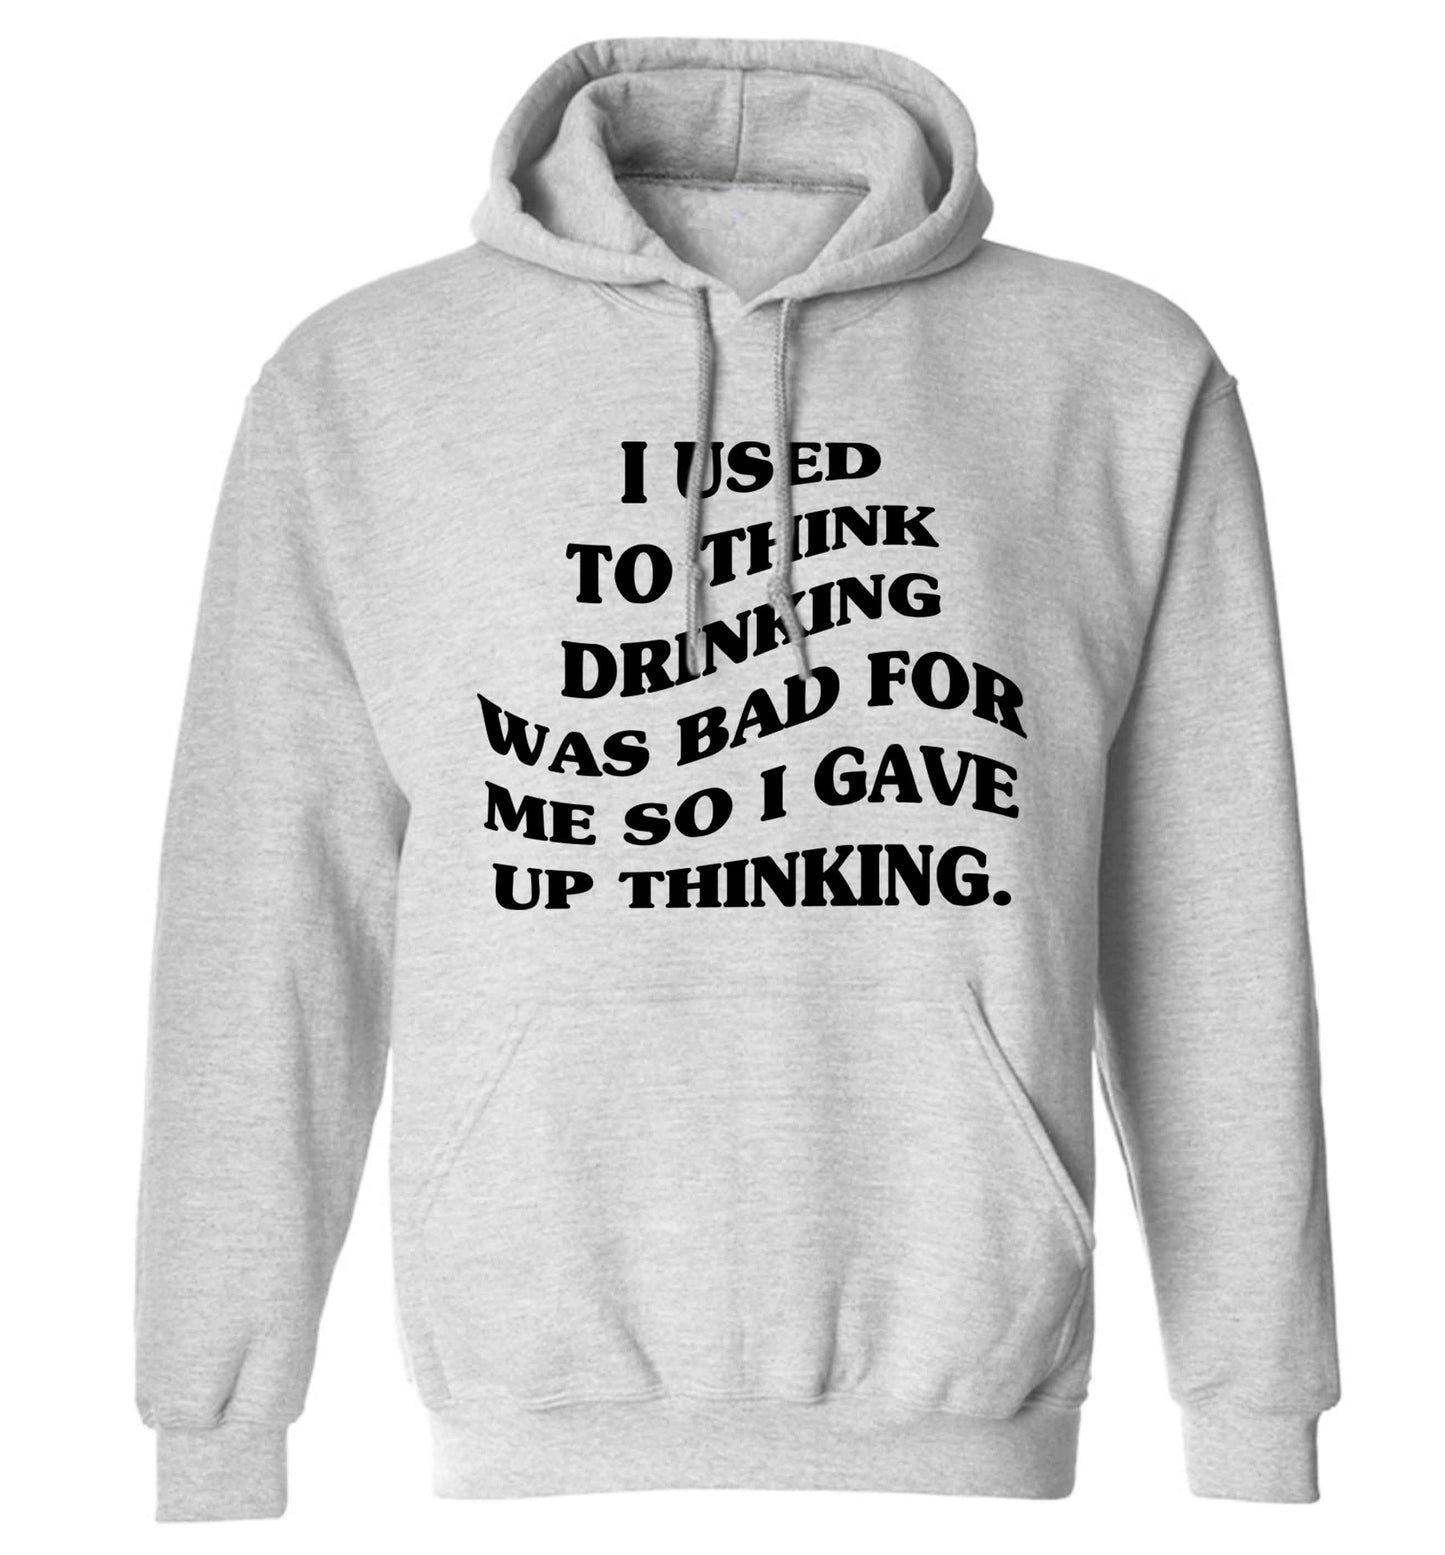 I used to think drinking was bad so I gave up thinking adults unisex grey hoodie 2XL